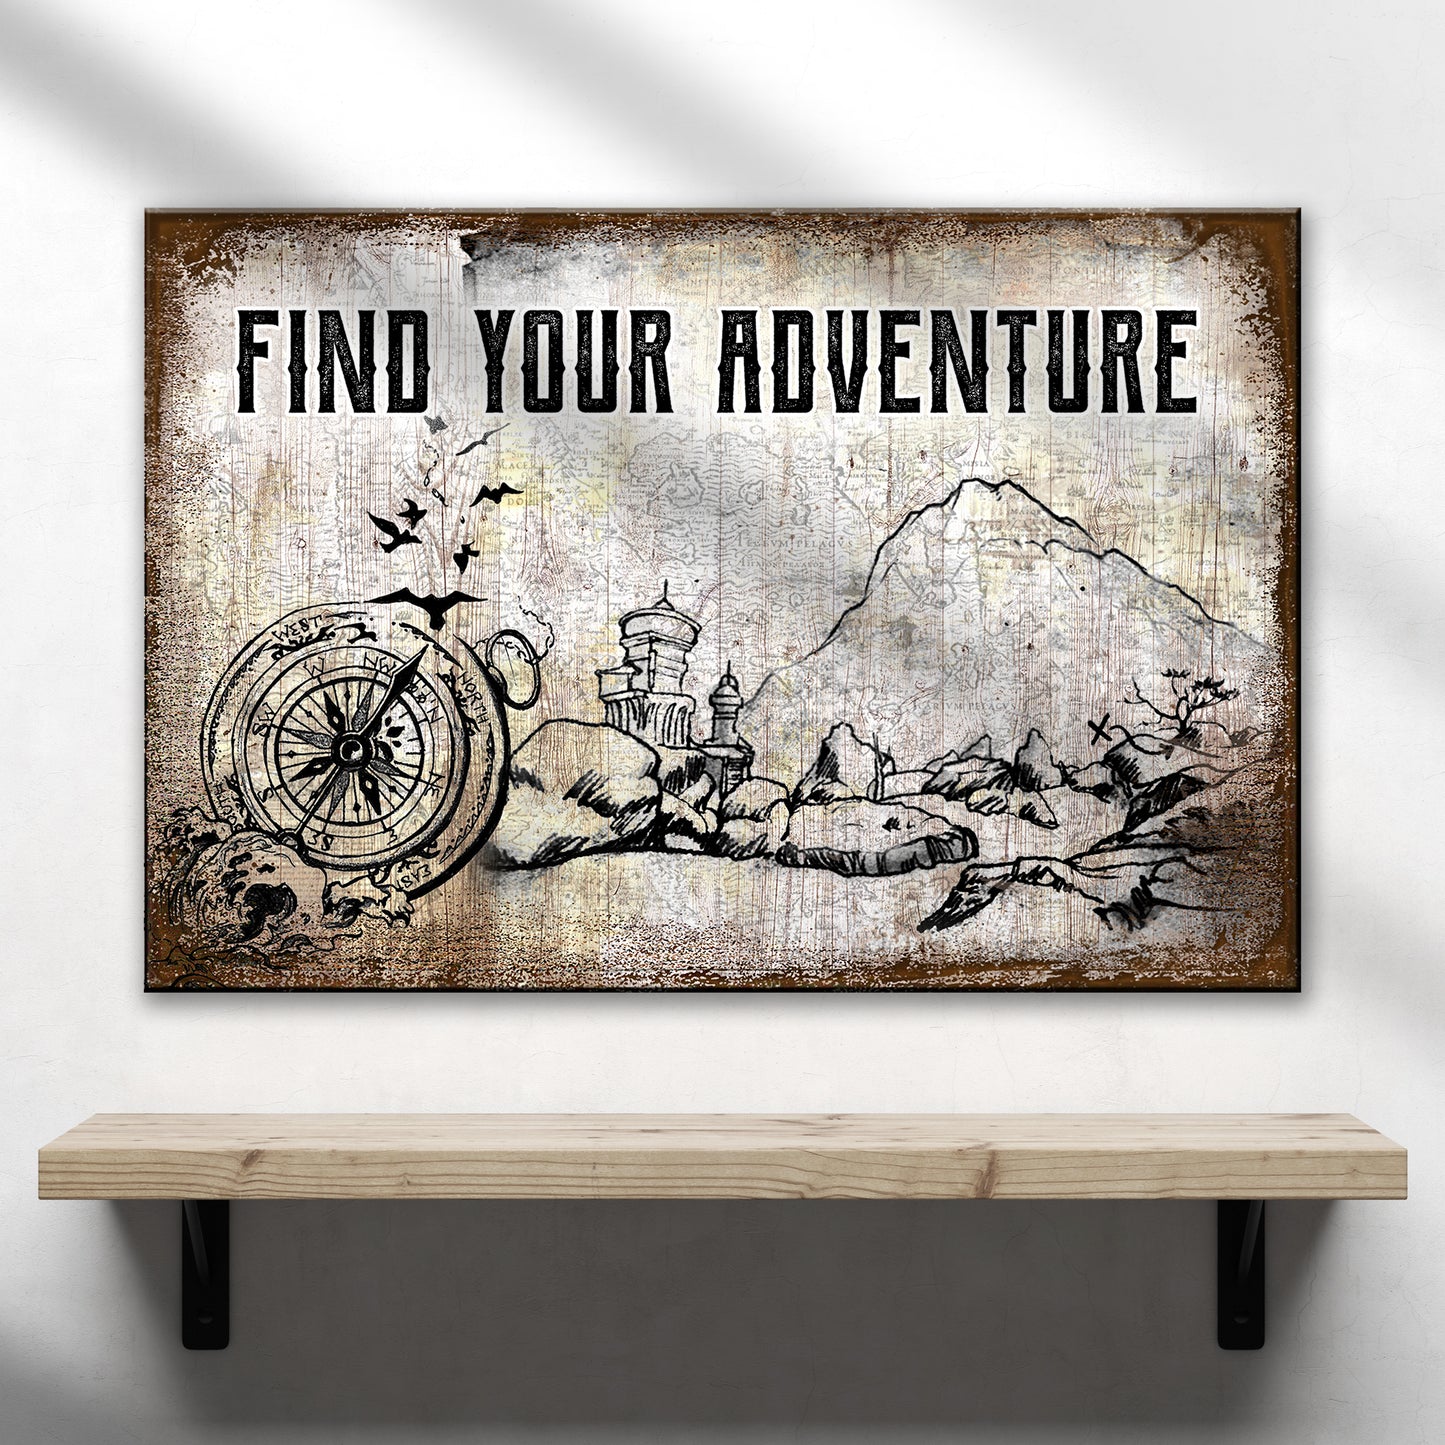 Find Your Adventure Sign - Image by Tailored Canvases